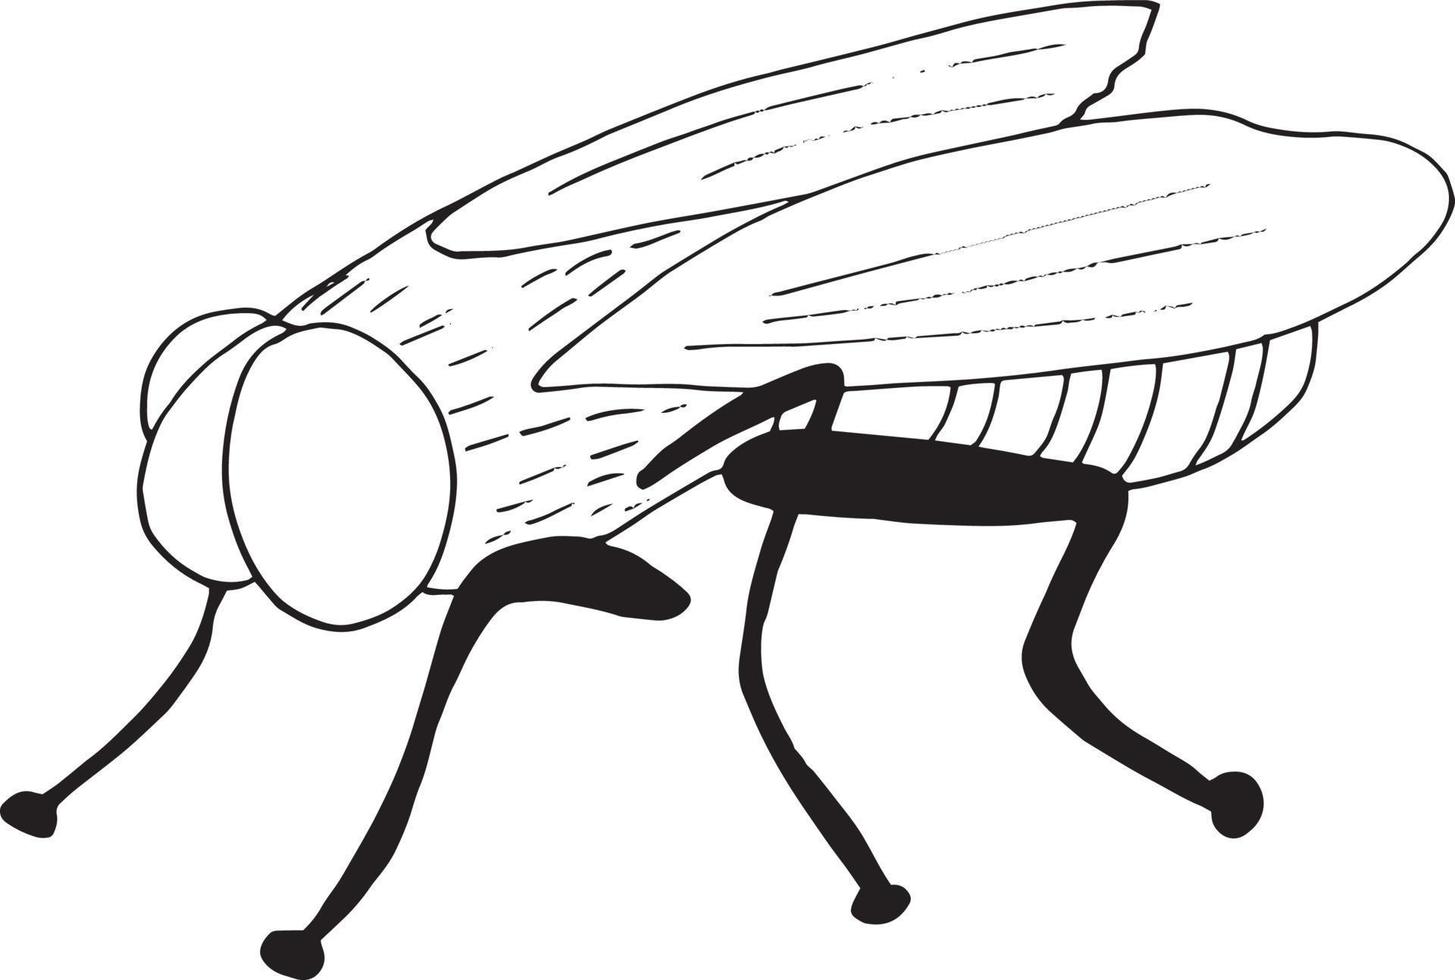 fly icon. hand drawn doodle style. , minimalism, monochrome sketch insect pest flies vector